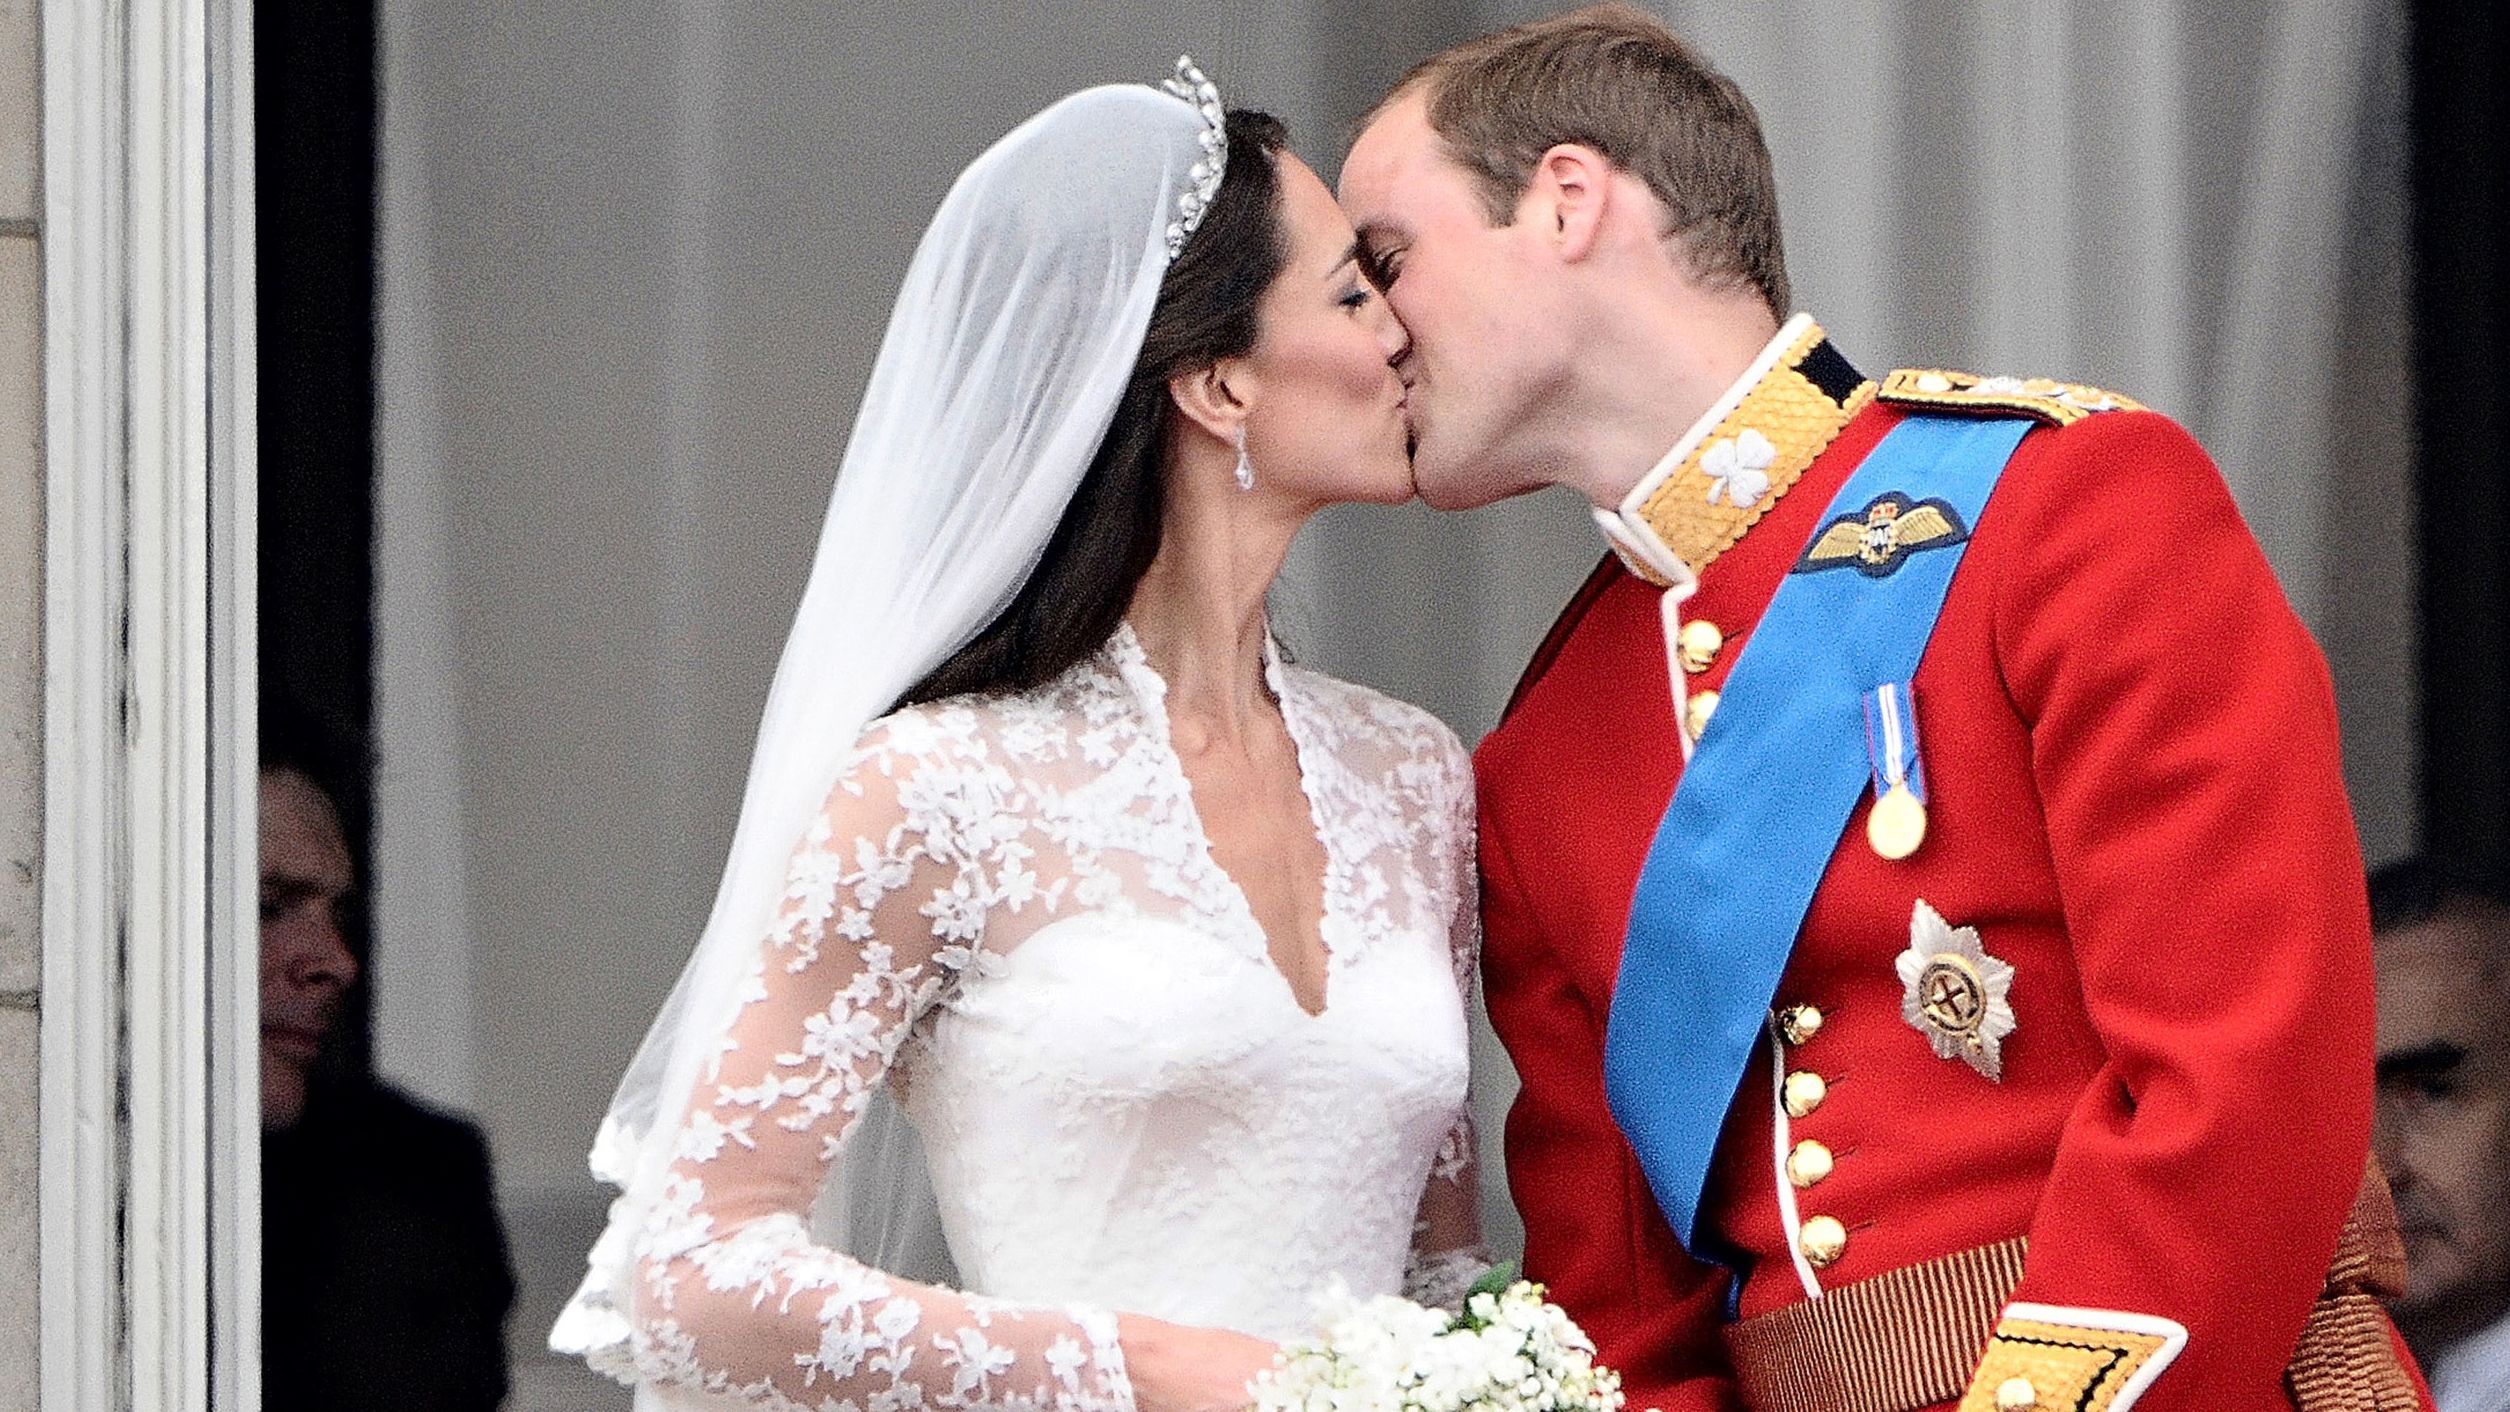 Prince William kisses his wife, Catherine, on the balcony of Buckingham Palace after their wedding on April 29, 2011. The two met while attending the University of St. Andrews.